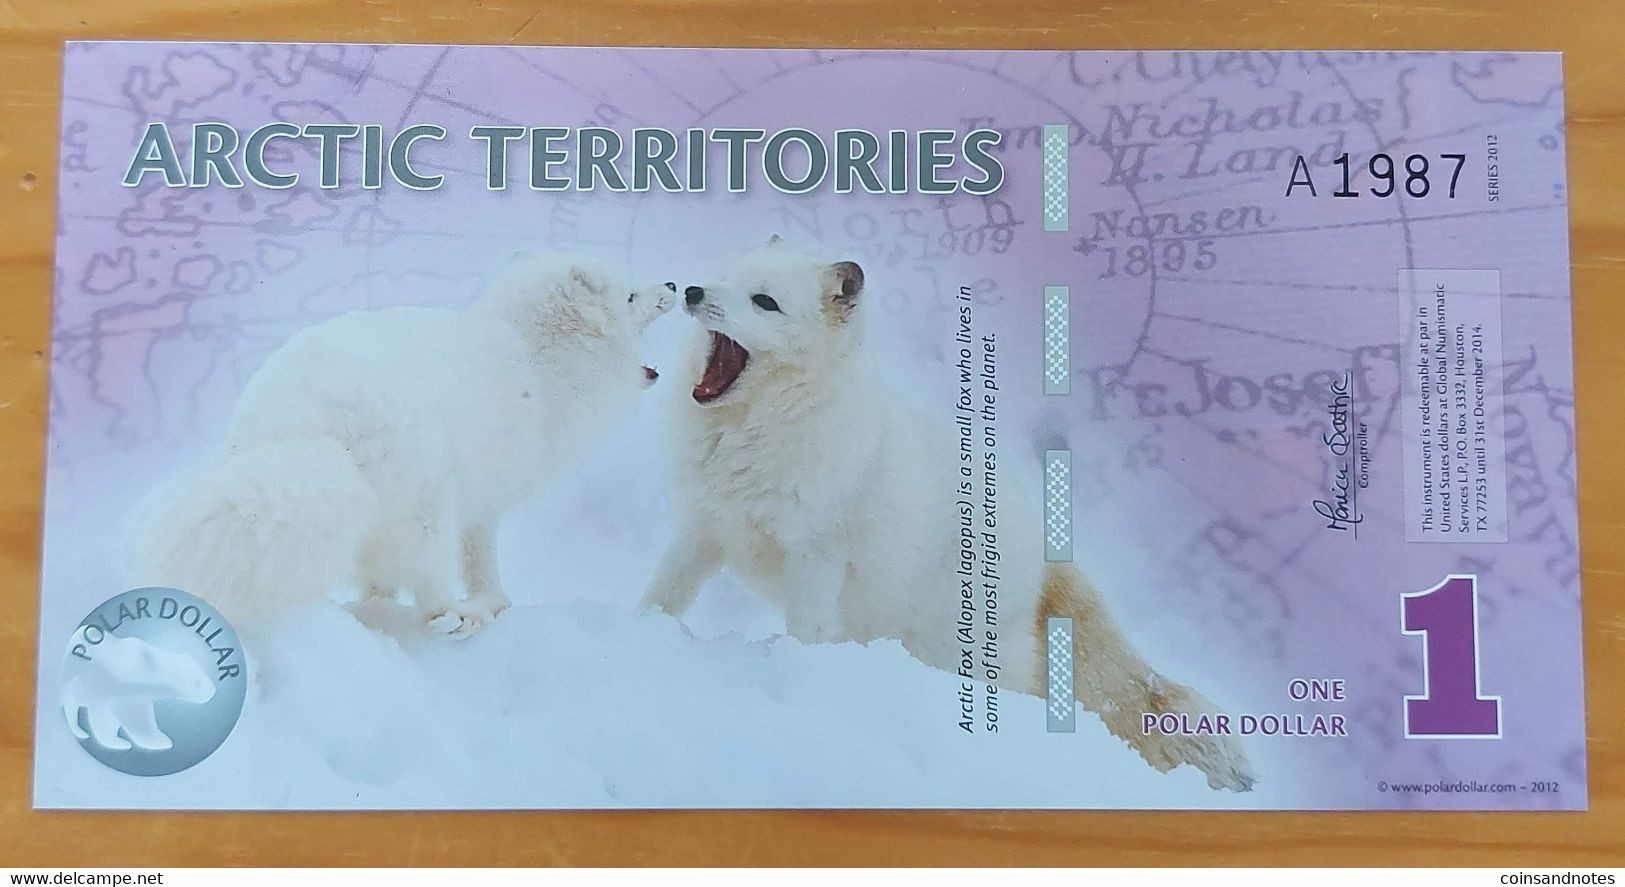 Arctic Territories (South Pole) 2012 - One ‘Polar’ Dollar - UNC - Other - America